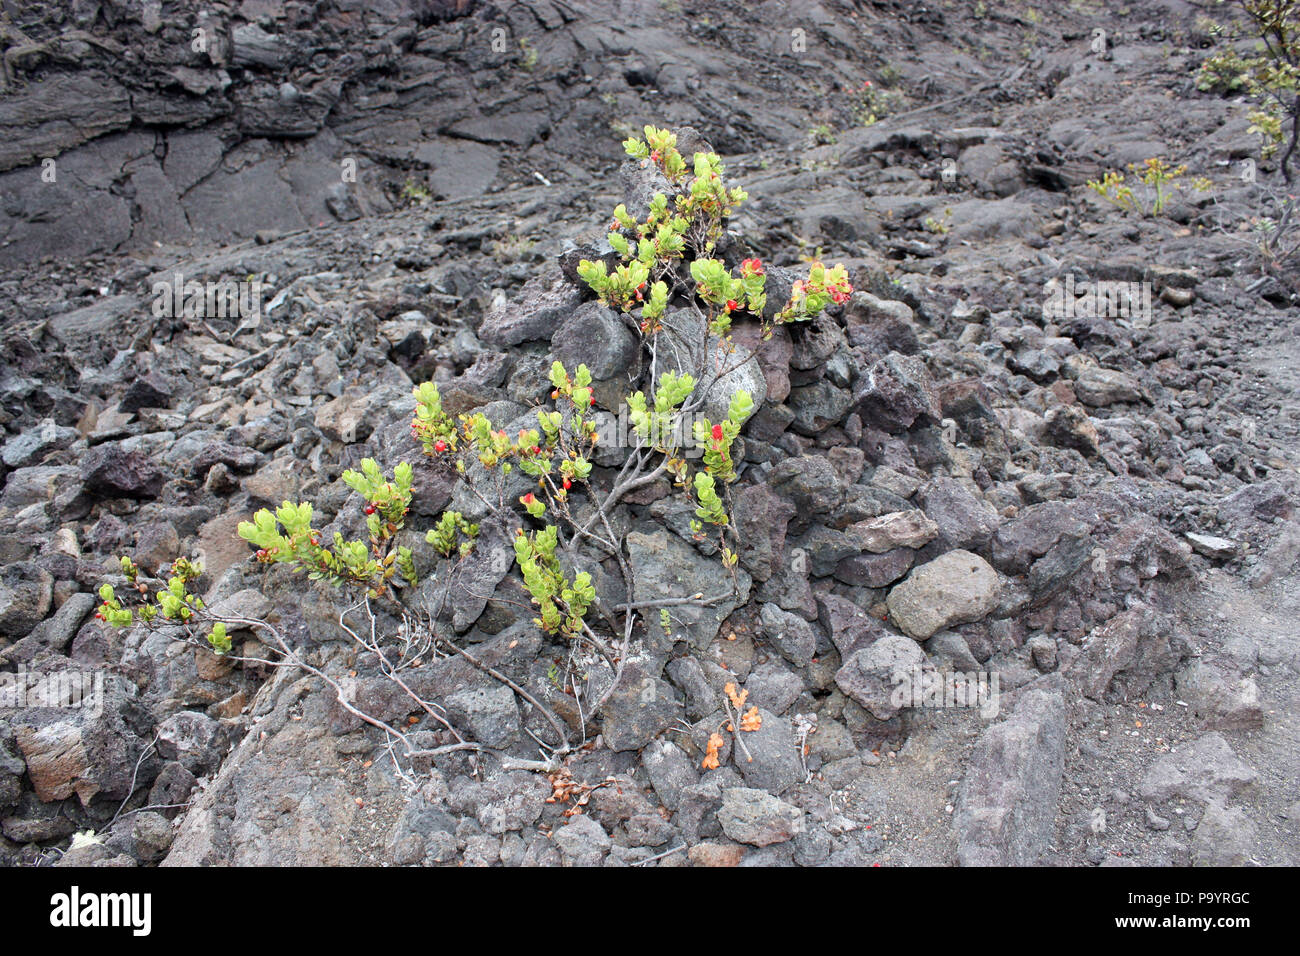 An Ohi'a plant growing through volcanic rock on the floor of the Kilauea Iki Crater in Volcanoes National Park, Hawaii, USA Stock Photo